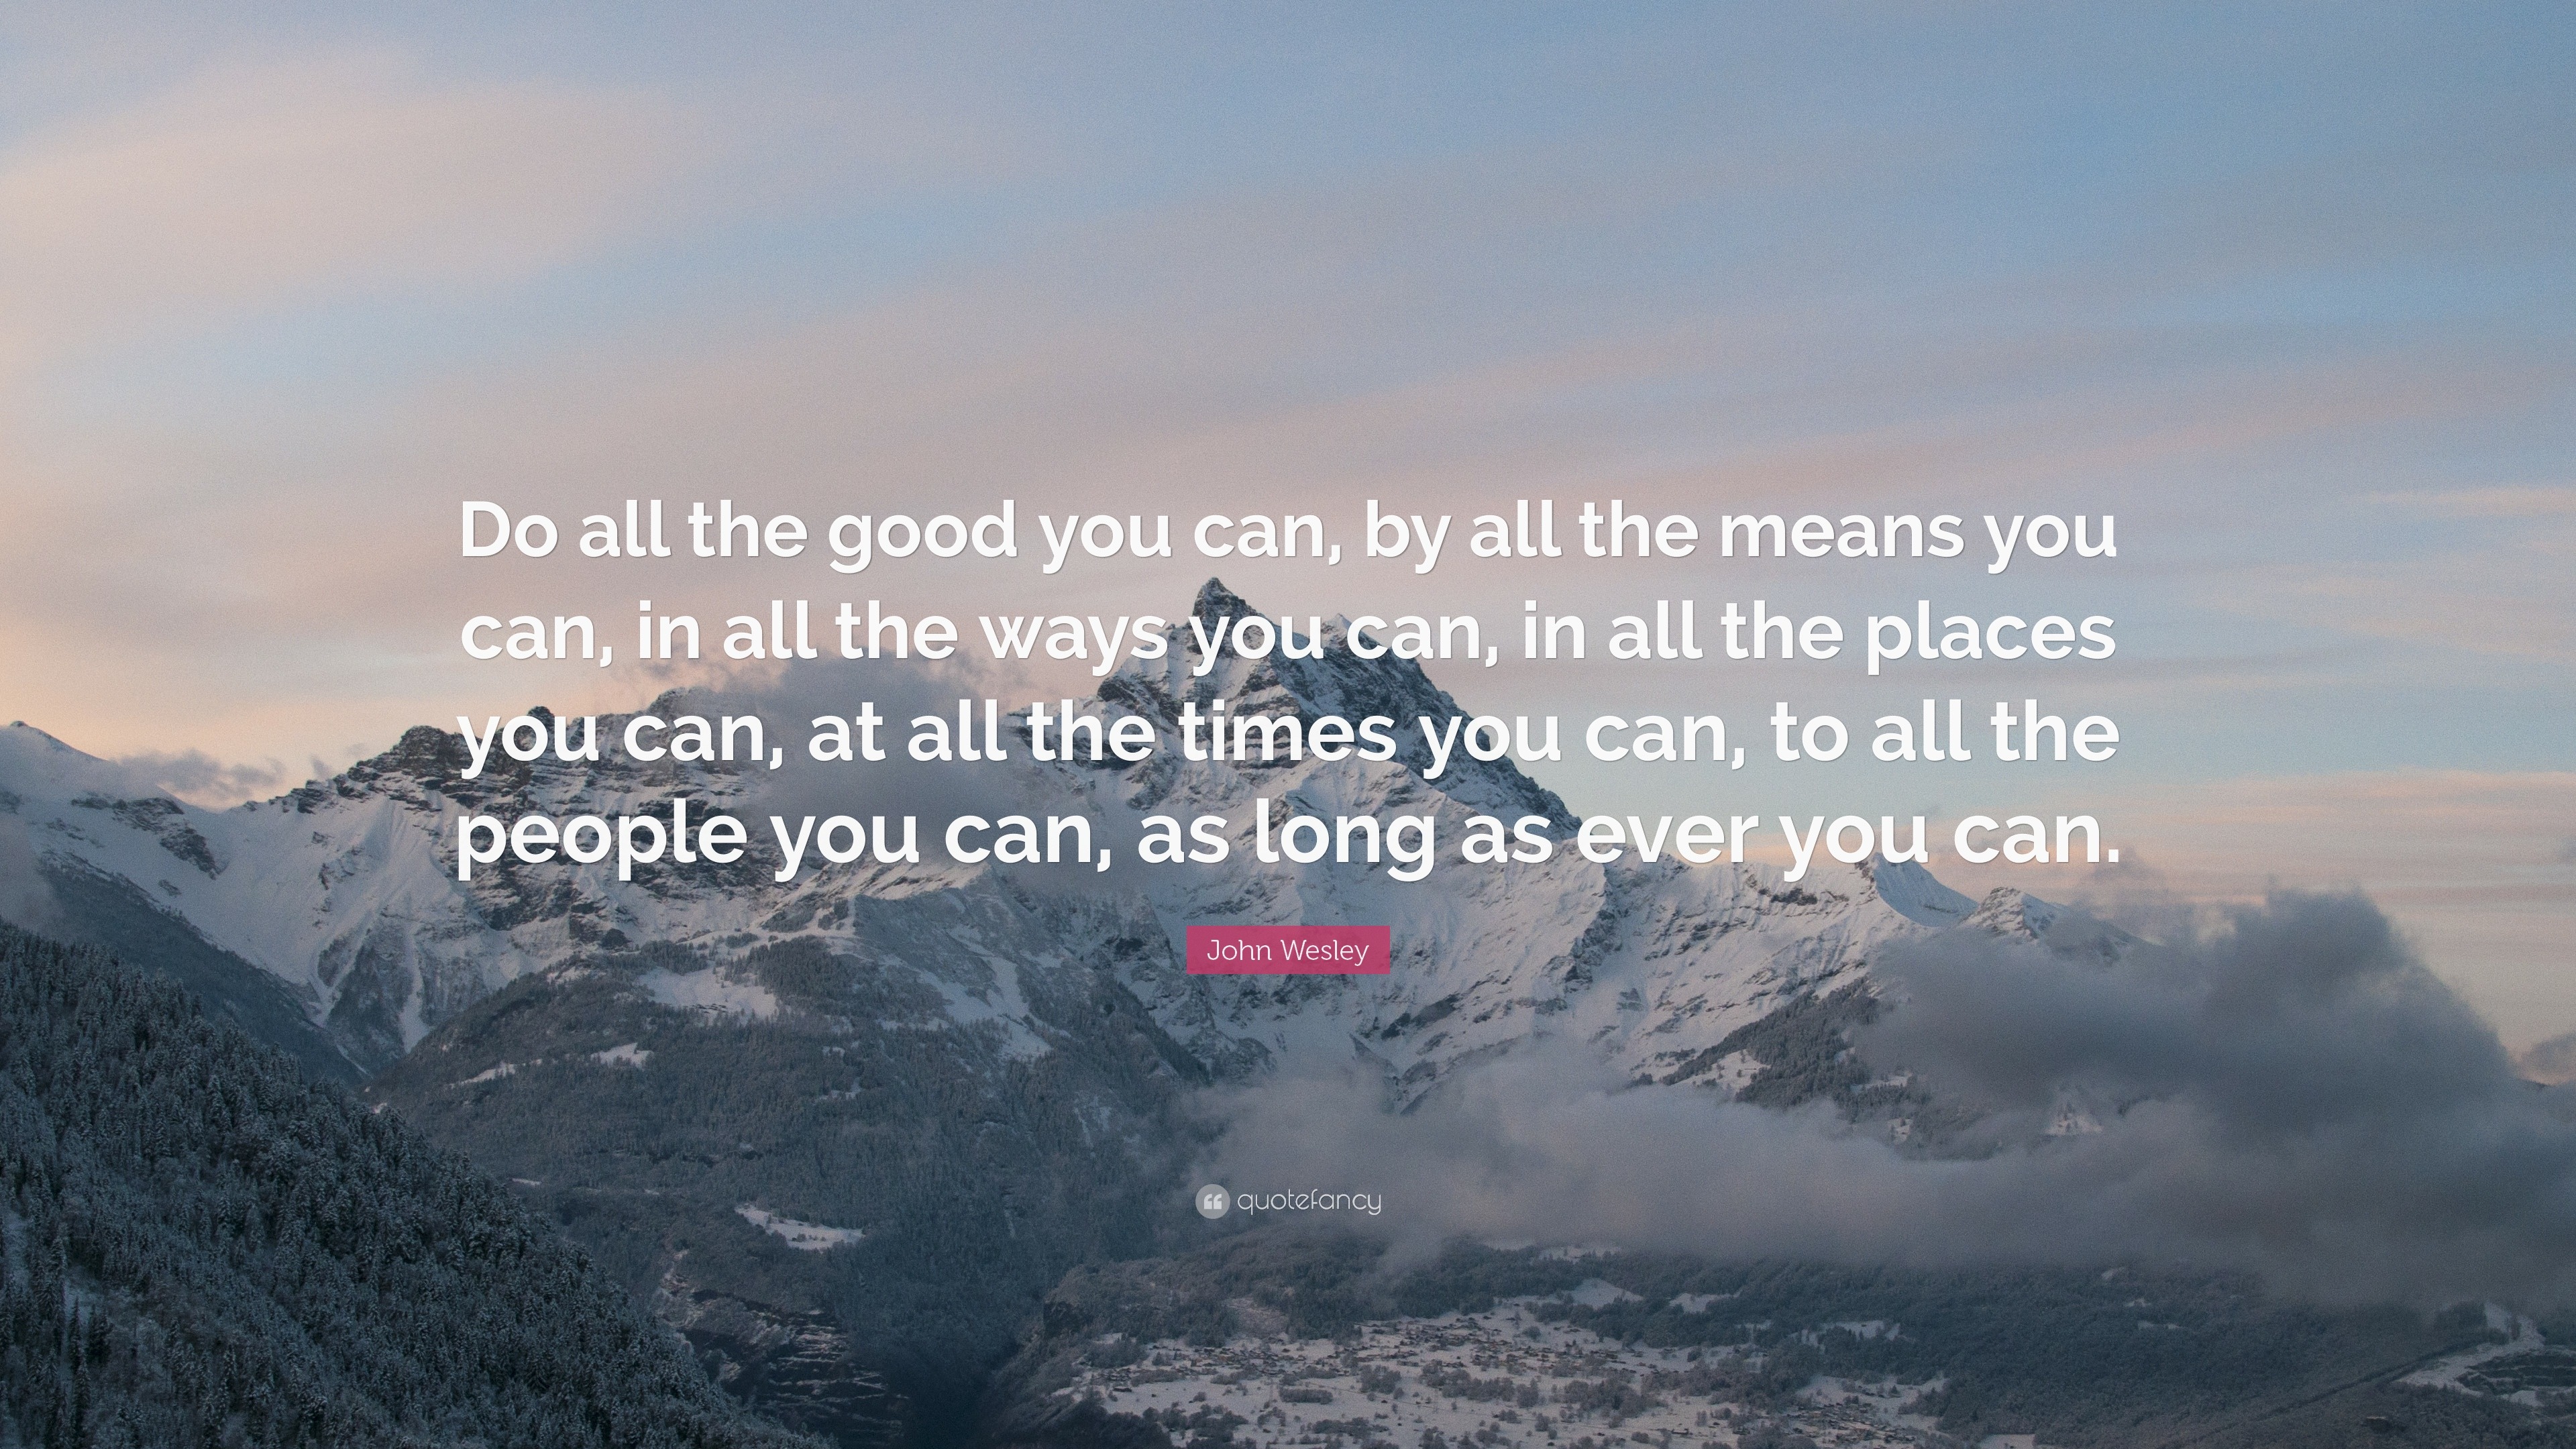 John Wesley Quote: “Do all the good you can, by all the means you